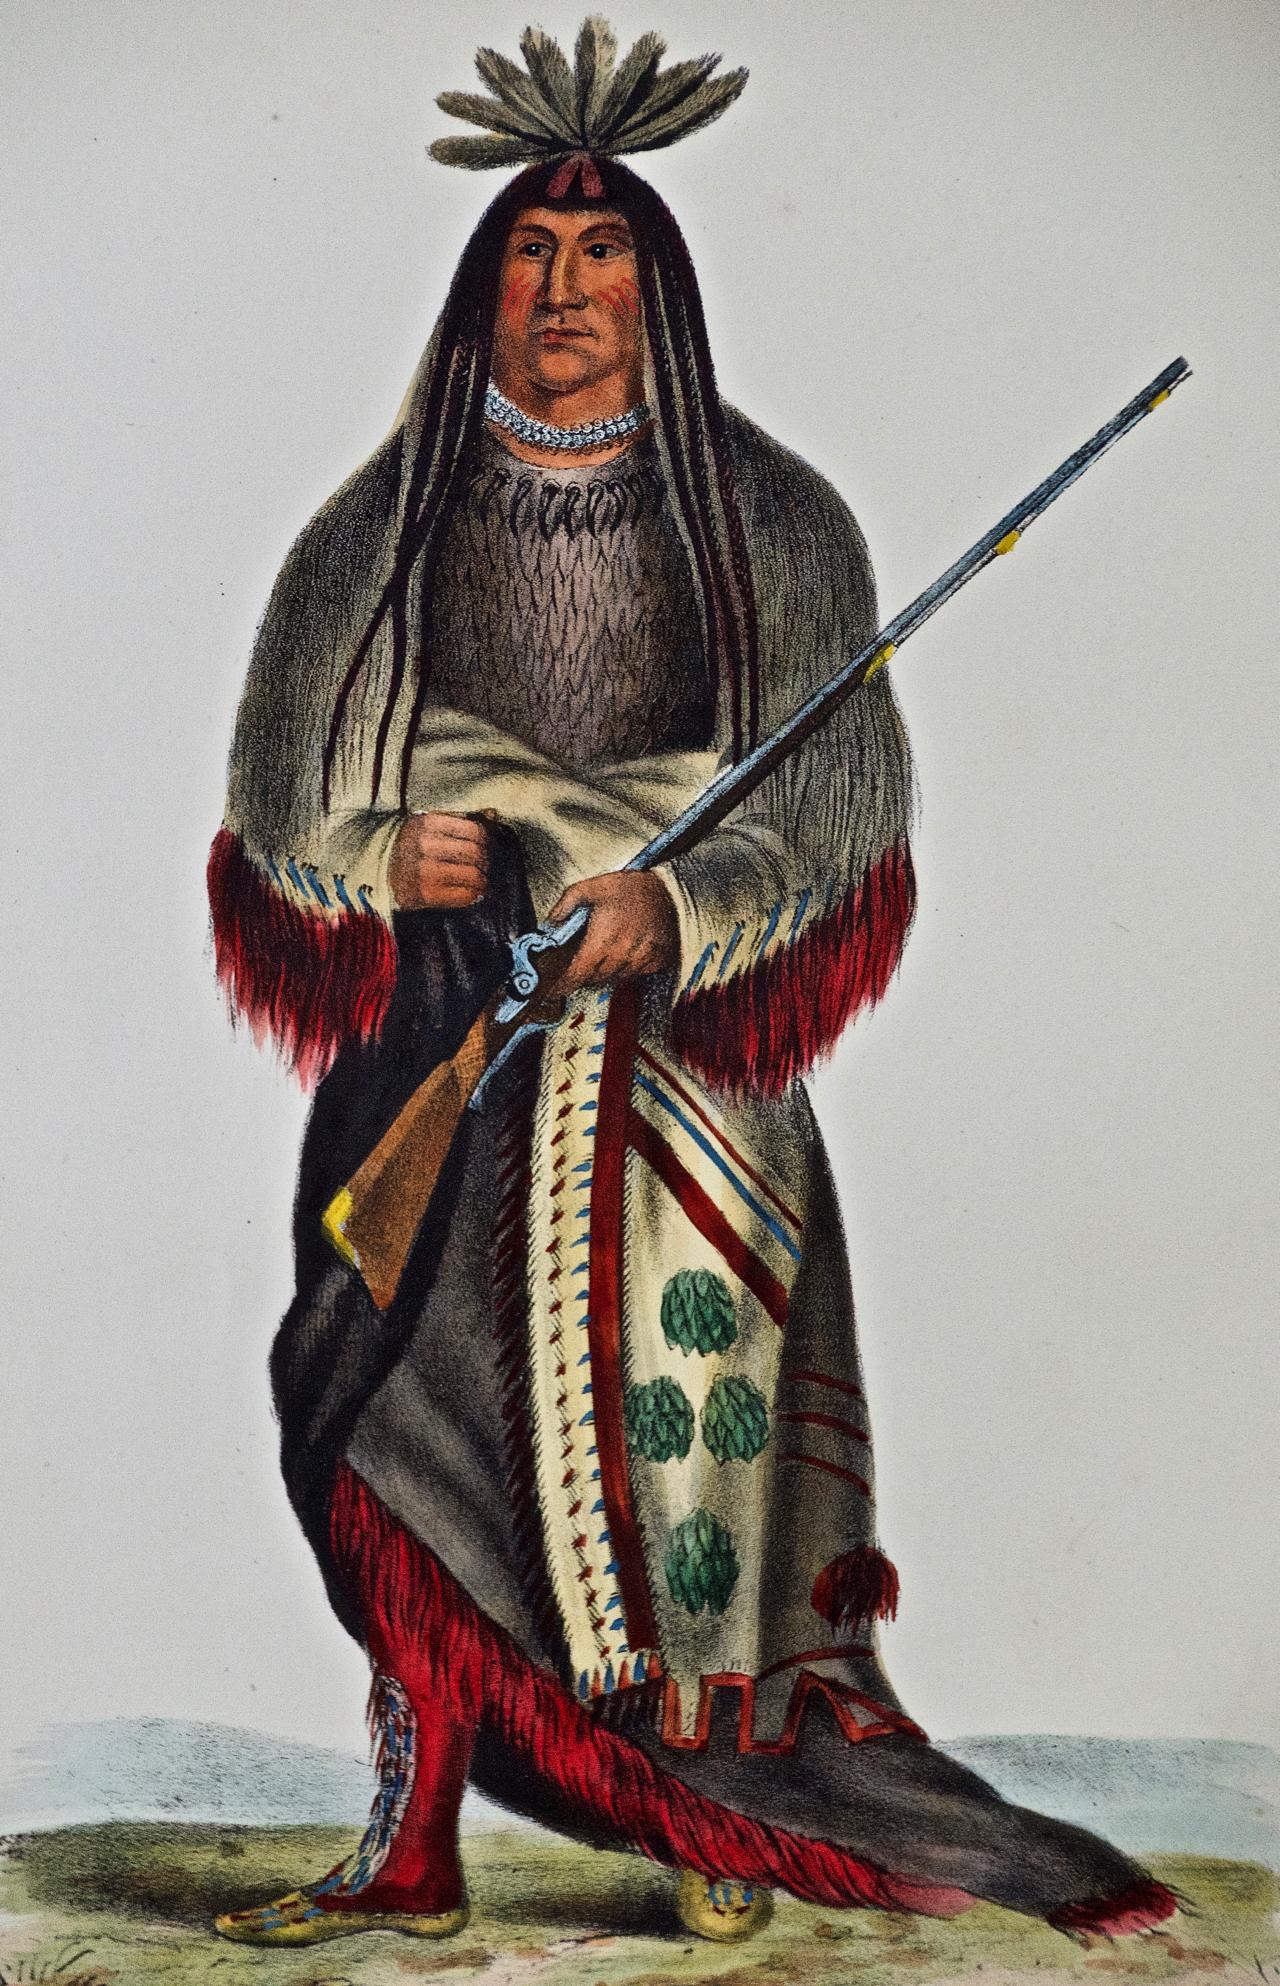 This is an original 19th century hand-colored McKenney and Hall engraving of a Native American entitled 